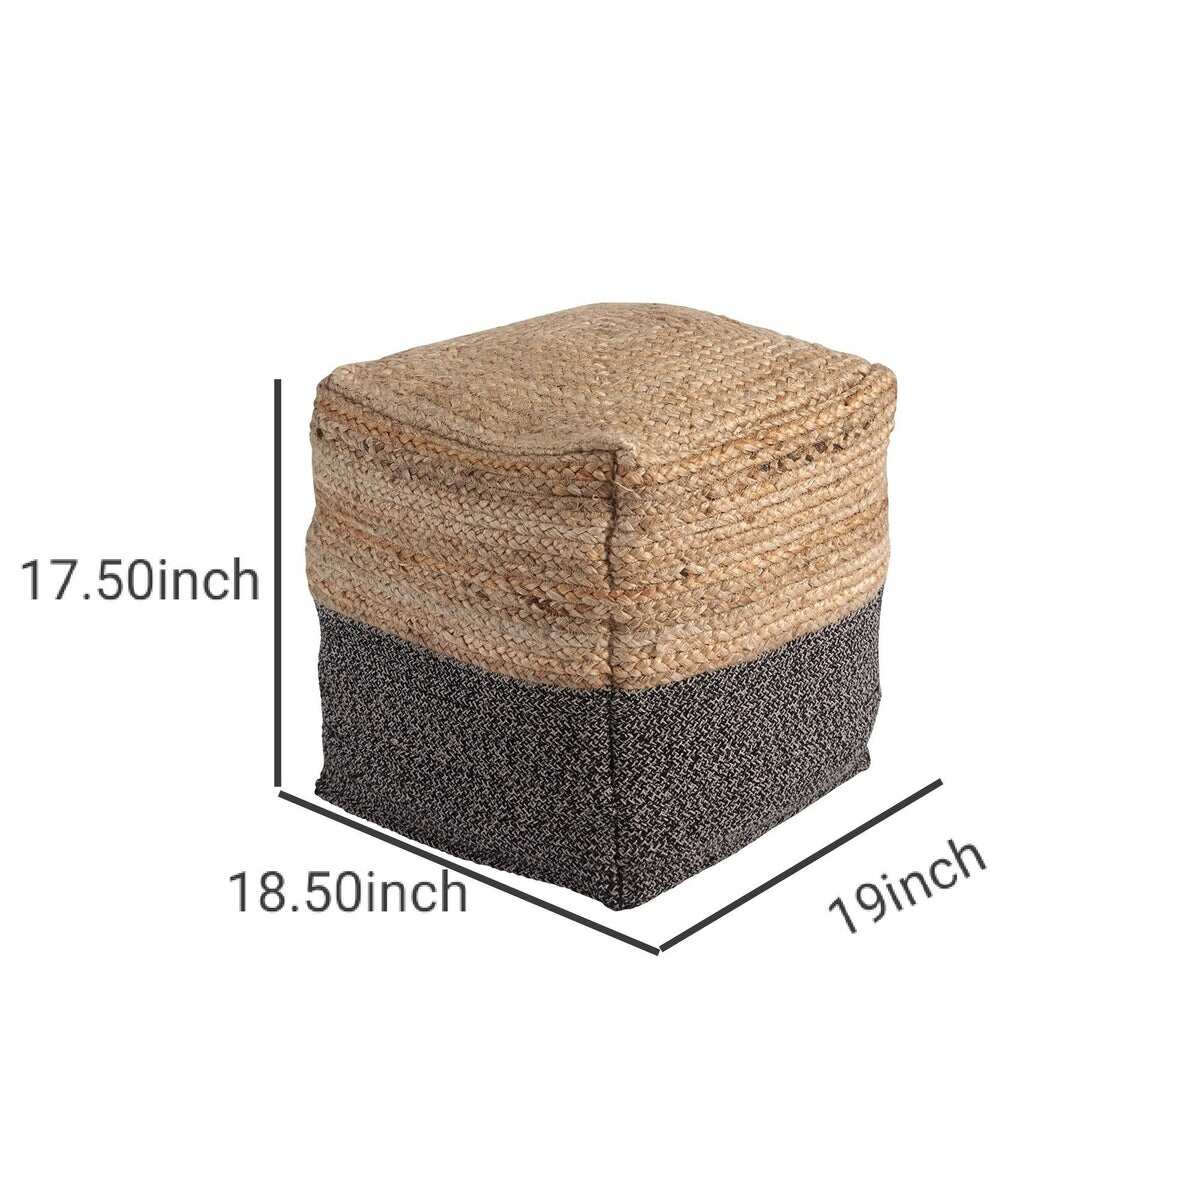 Cube Shape Jute Pouf with Braided Design, Black and Brown